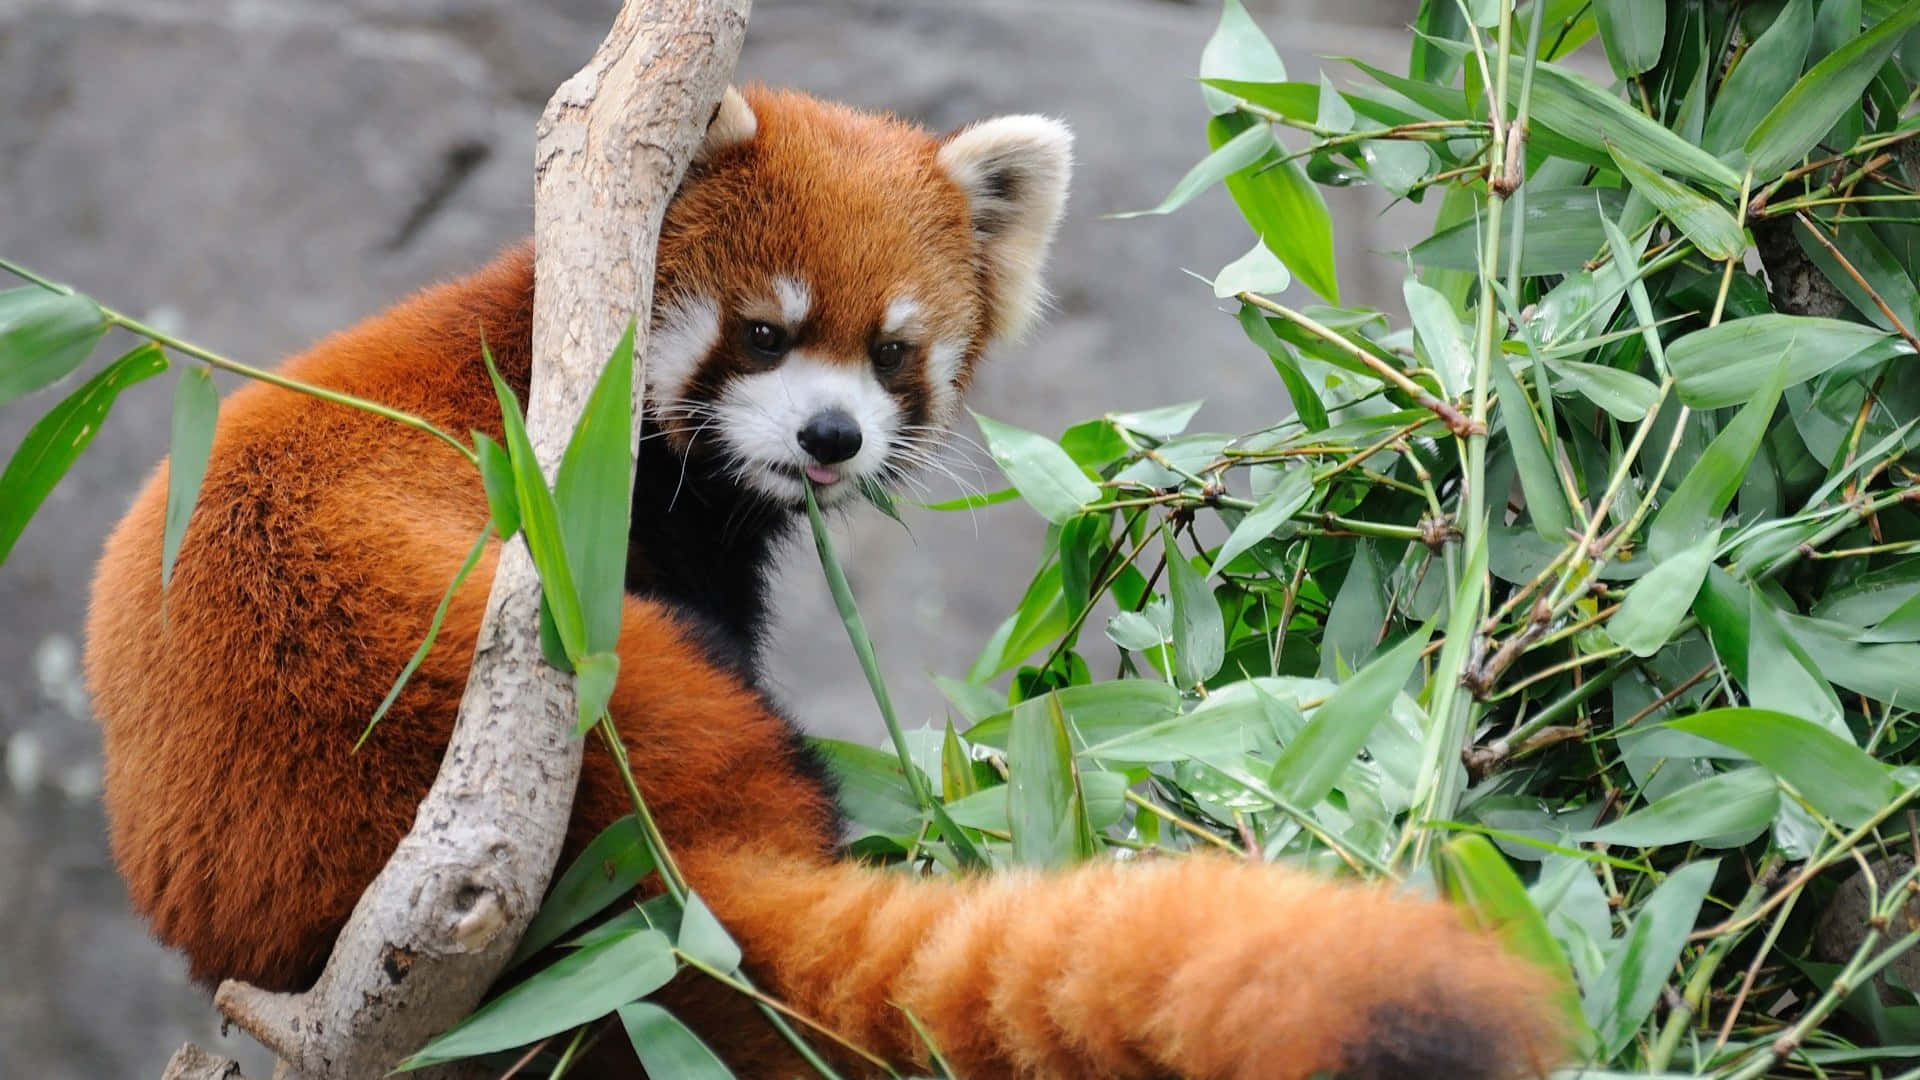 A sweet and cuddly red panda waiting to be pet. Wallpaper